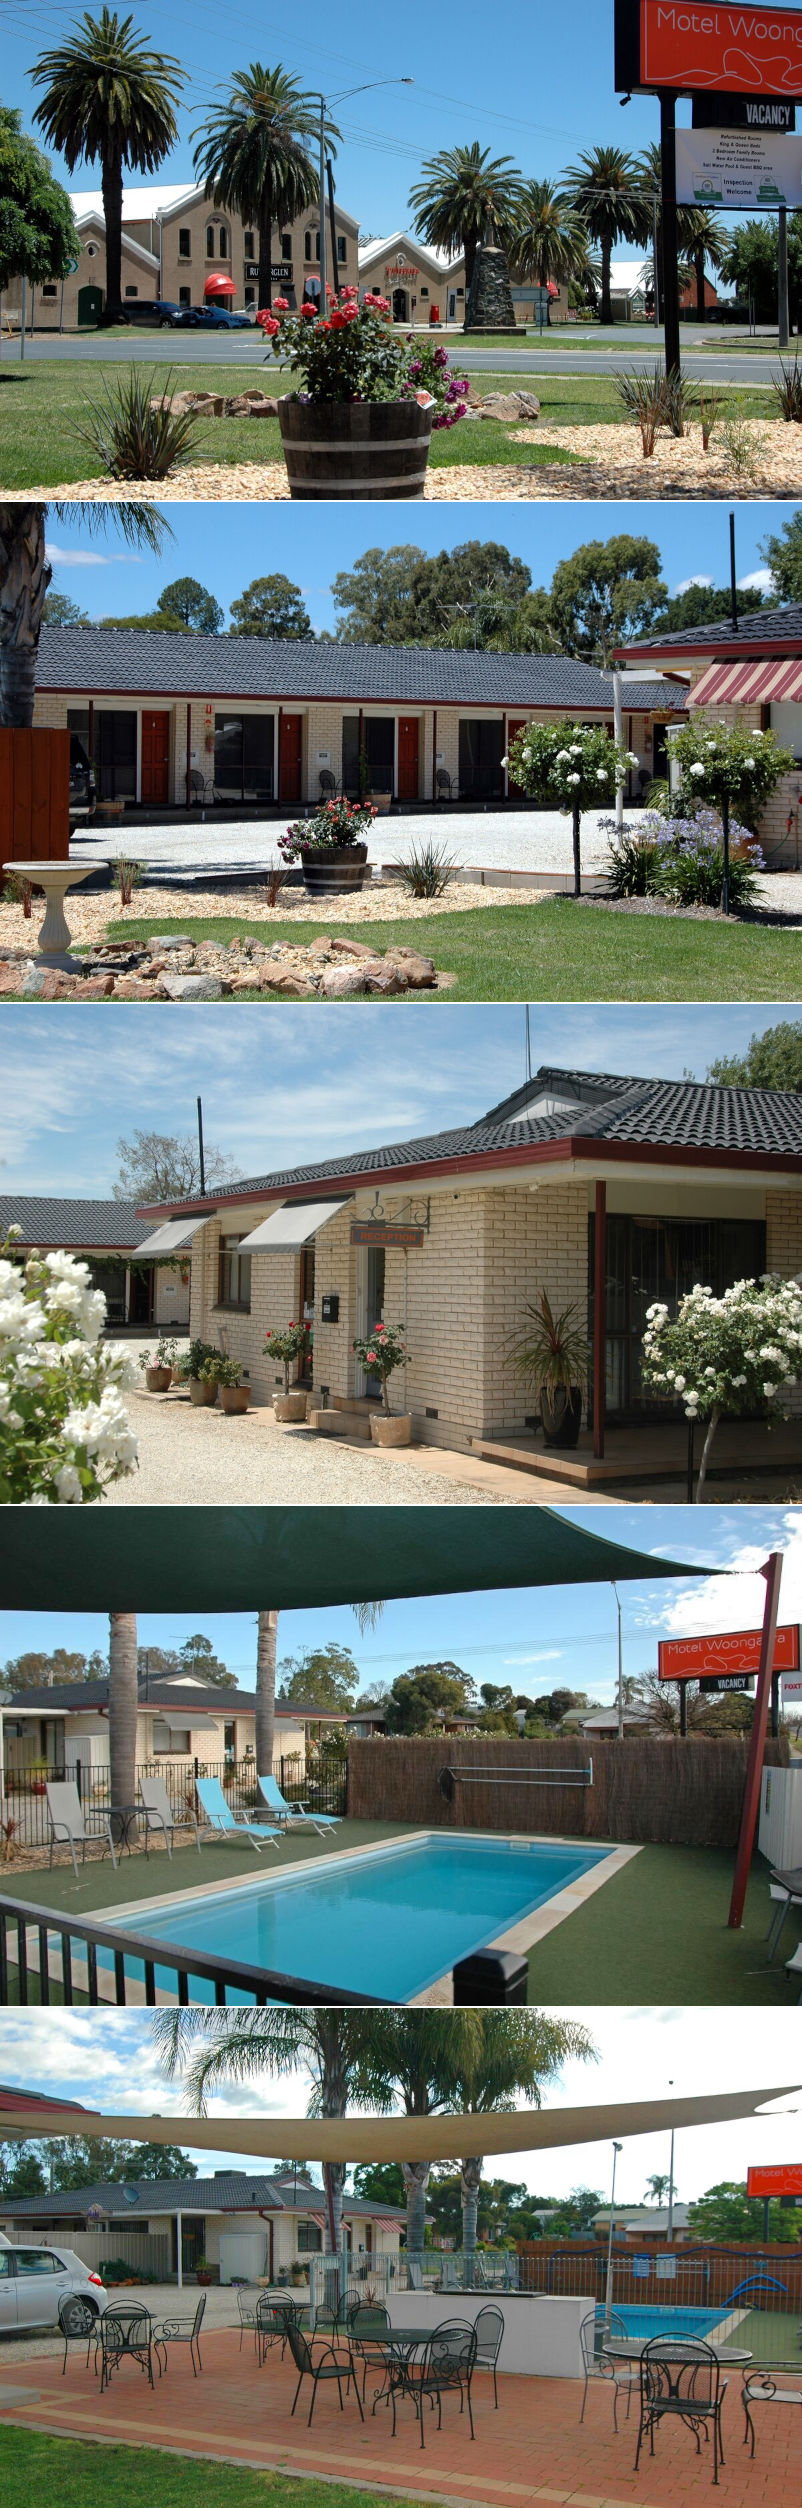 Motel Woongarra - Grounds and facilities